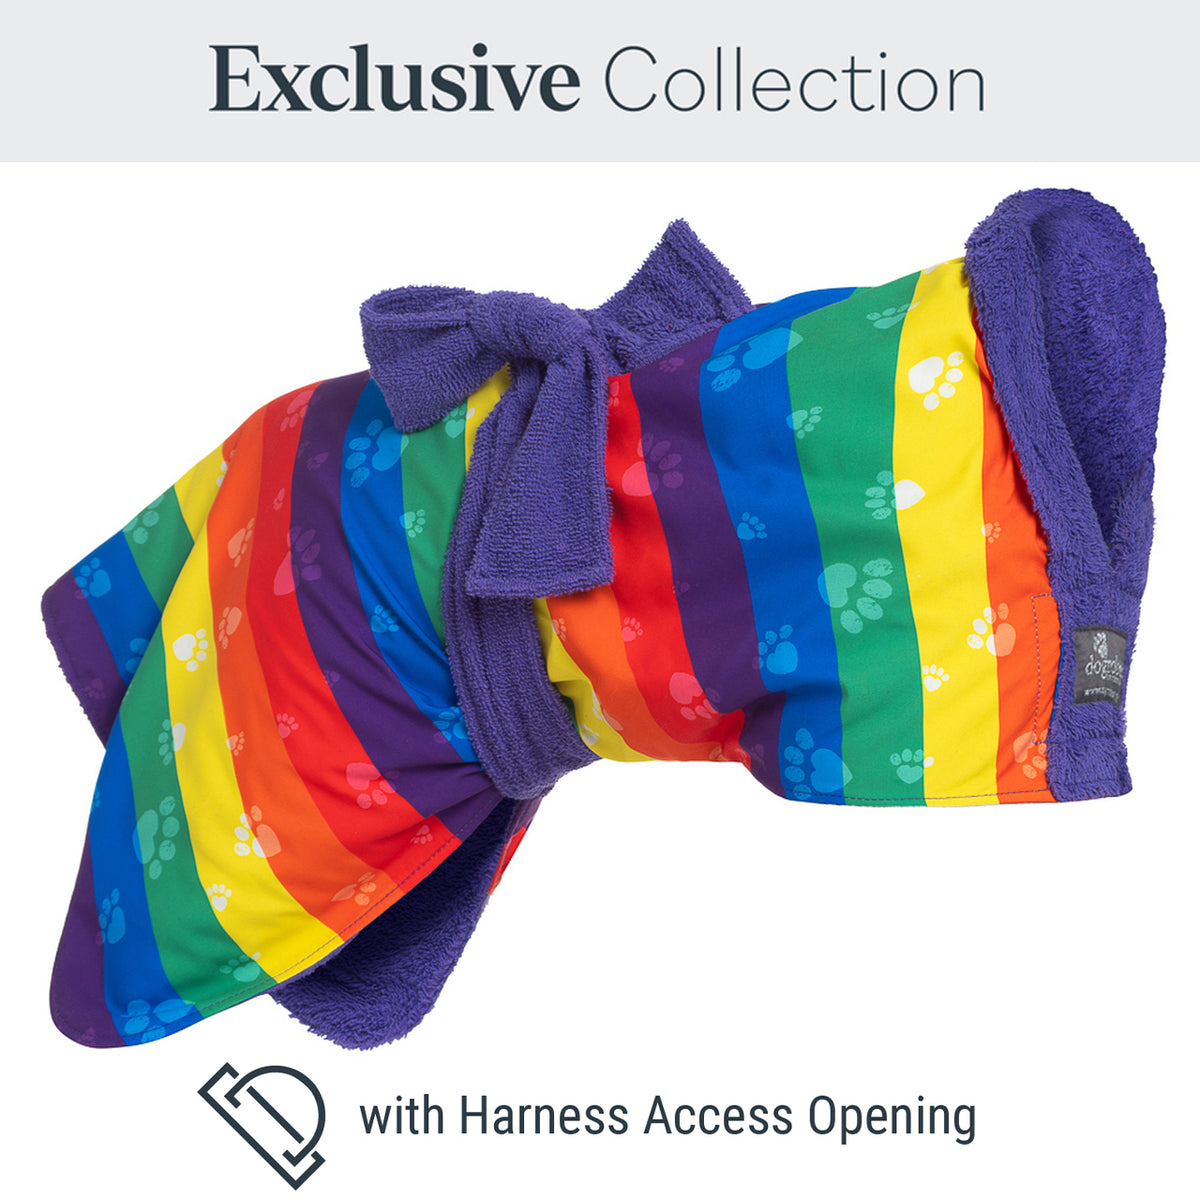 Exclusive collection DogRobe drying coat, with harness access opening in Rainbow pattern.